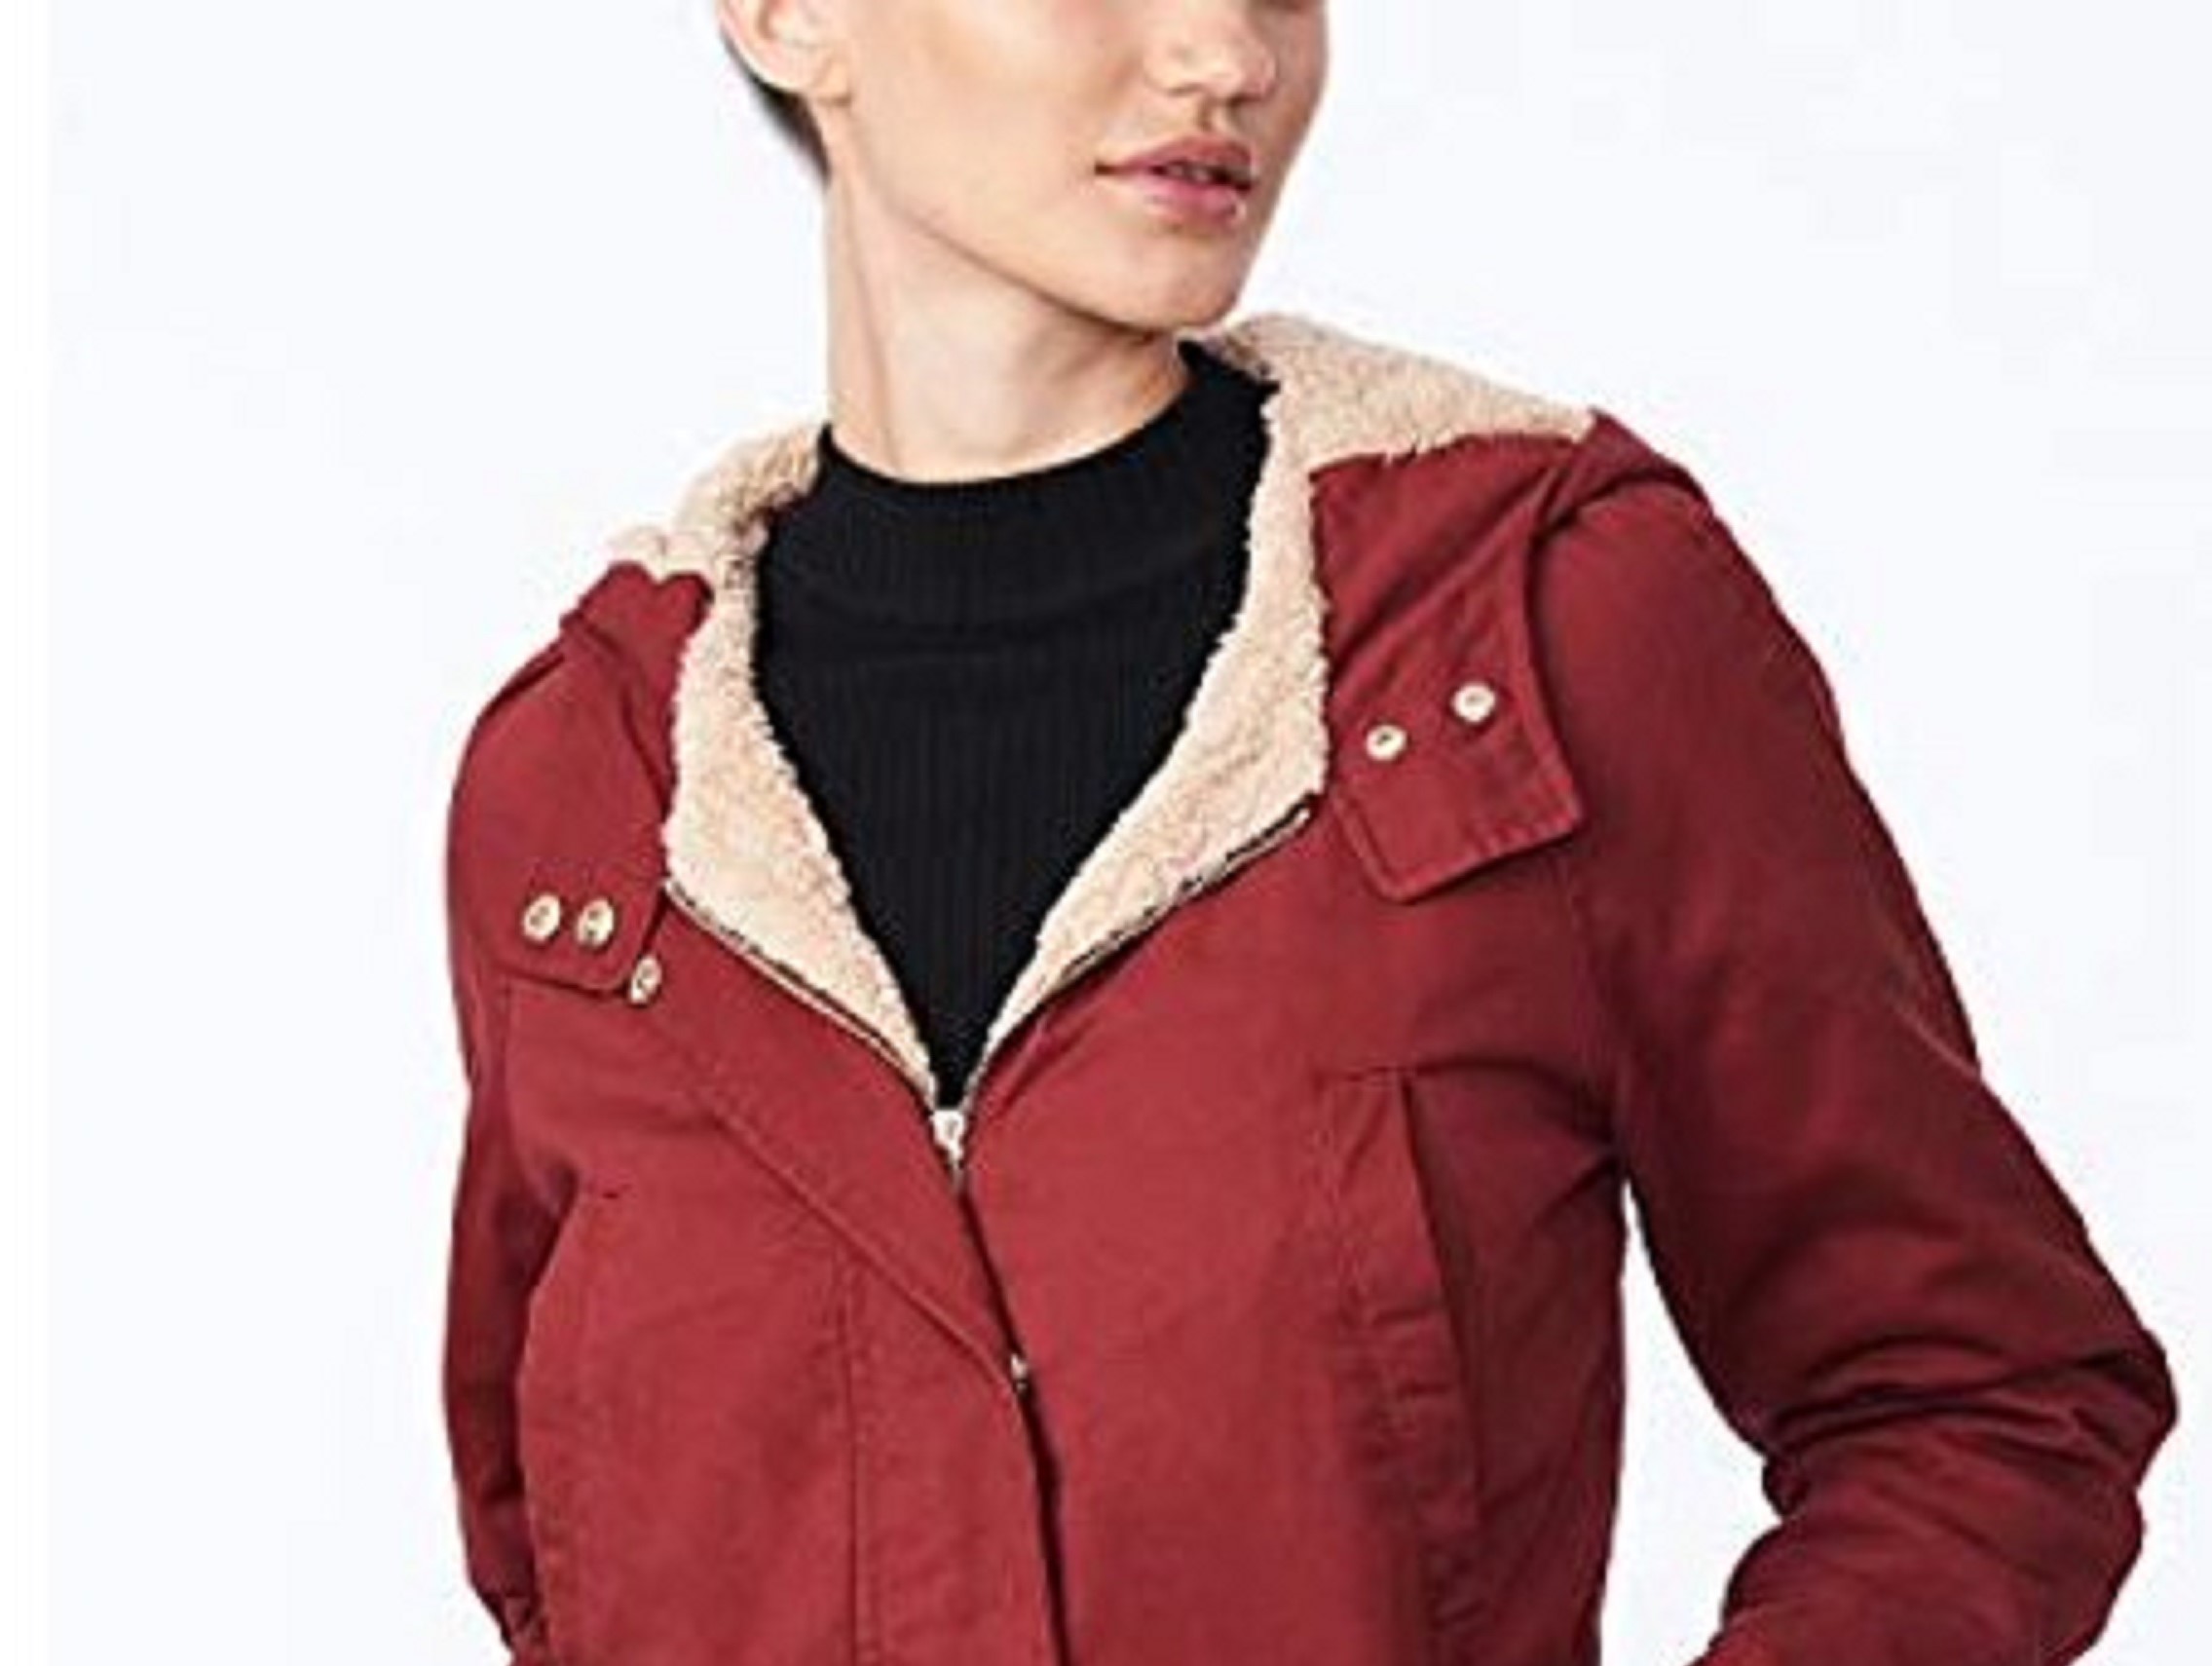 COLLECTIONB Womens Red Pocketed Zippered Hooded Anorak Button Down Jacket XS - image 3 of 3